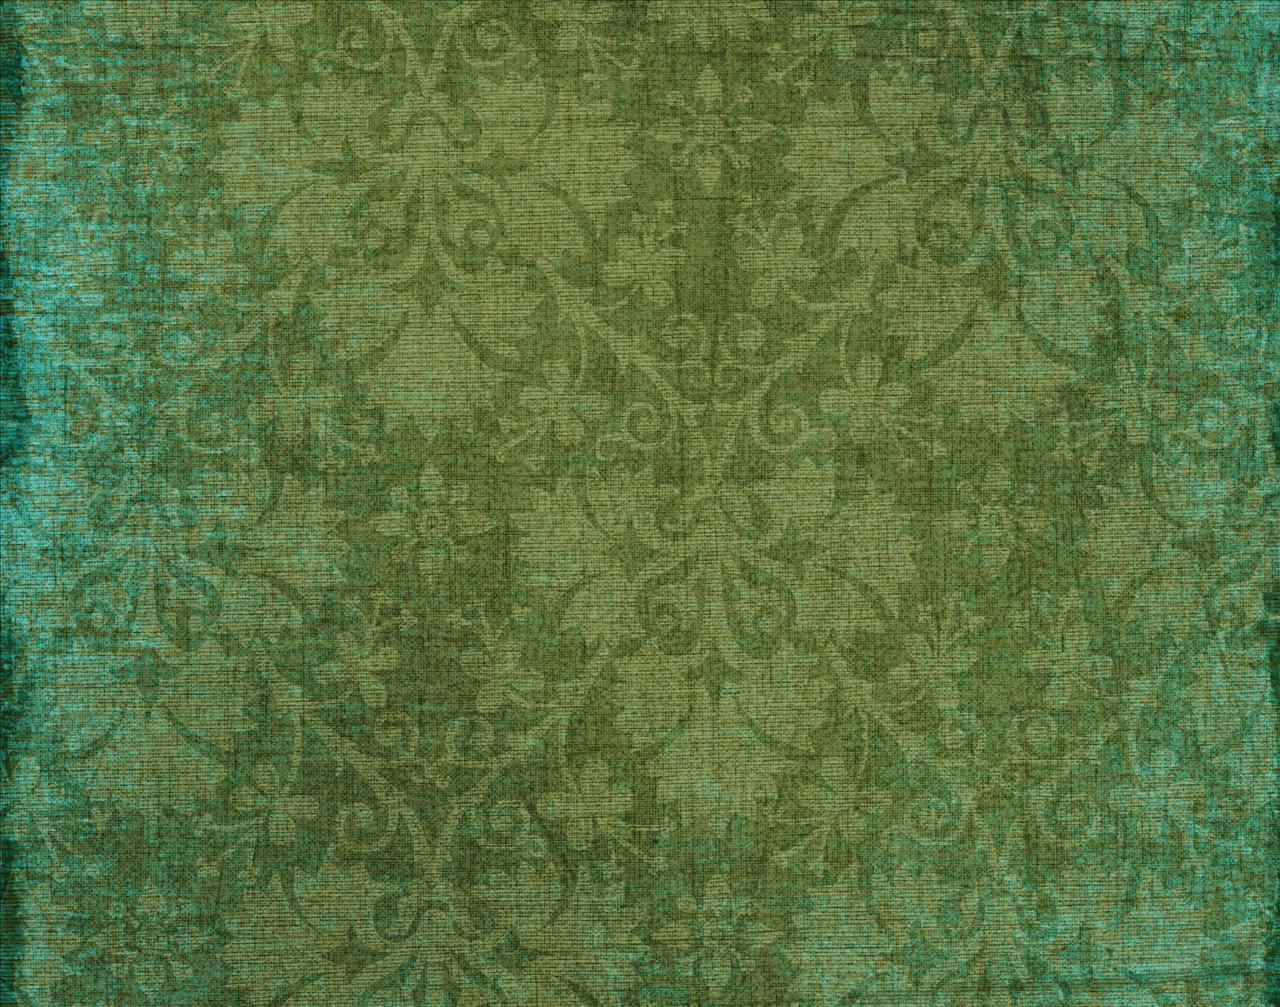 green vintage background - group picture, image by tag ...